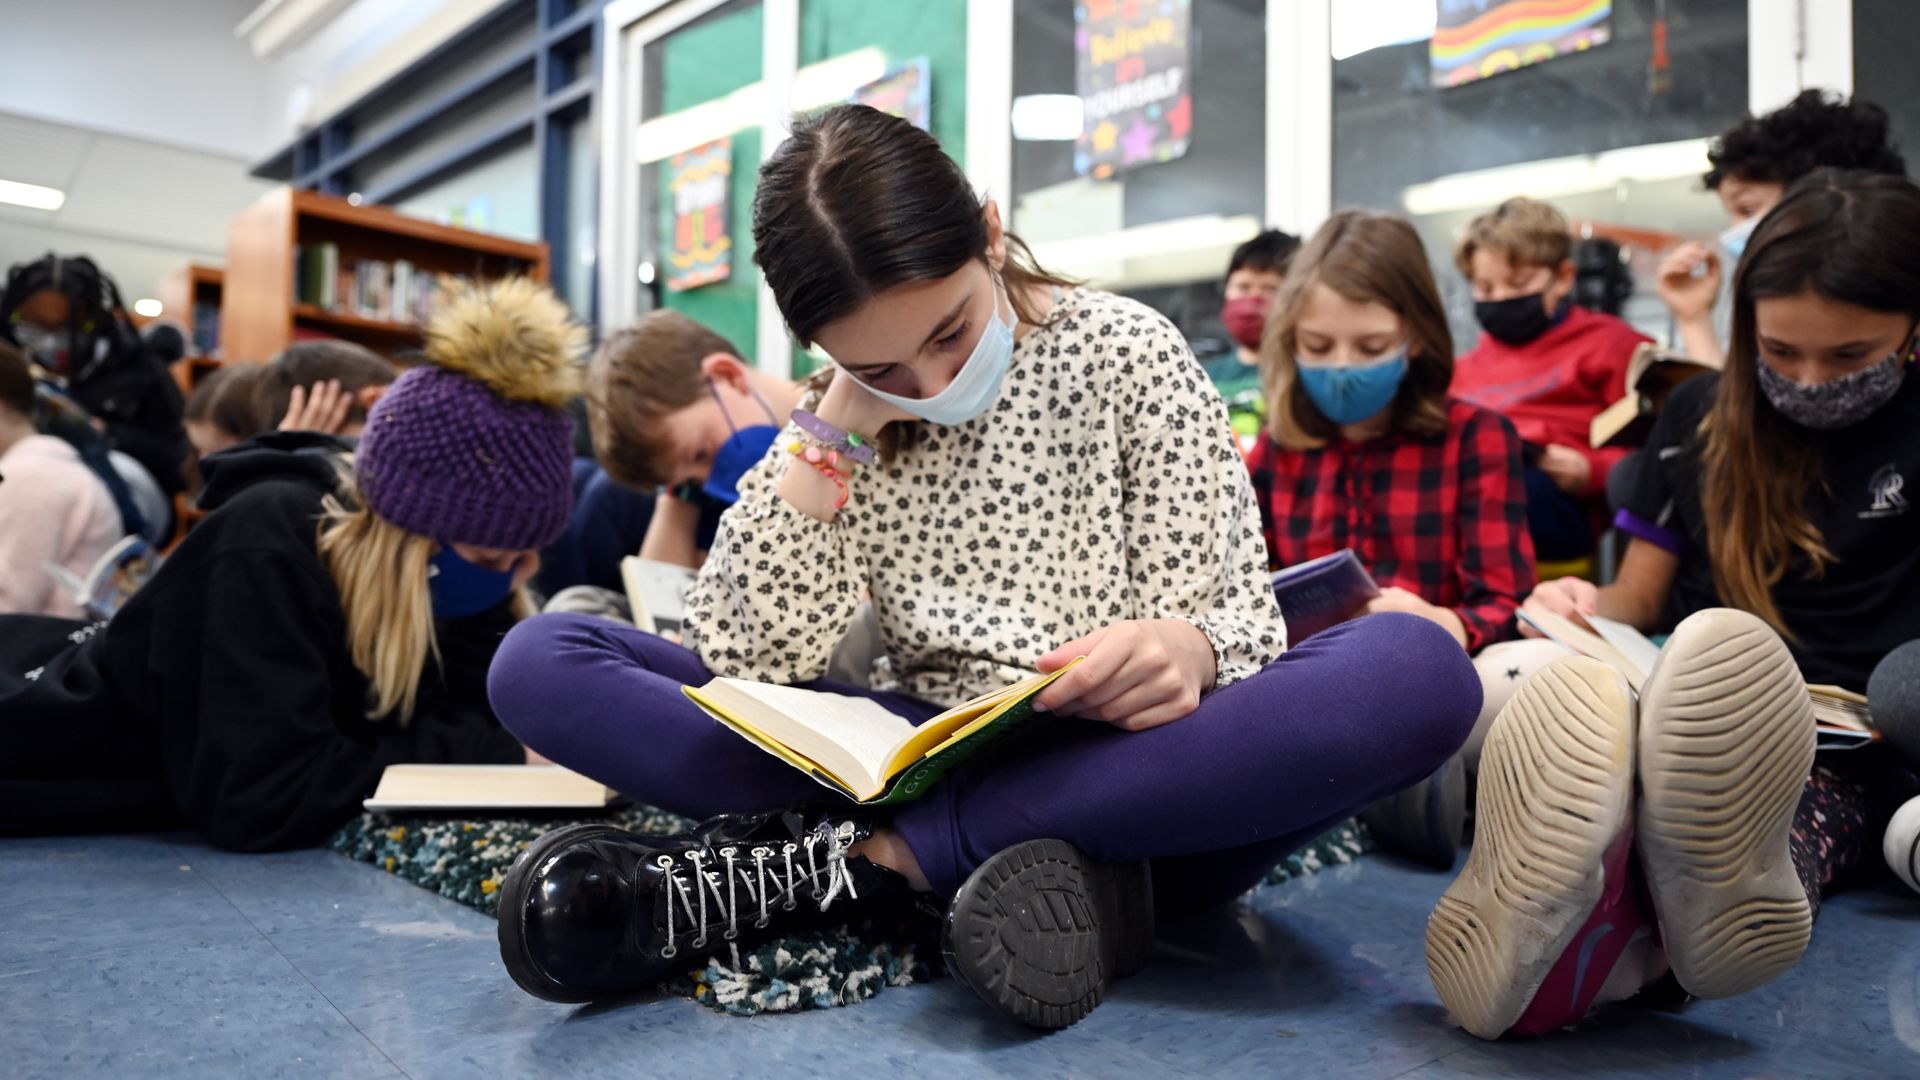 Sophia Koutroulos, 10, front, and 5th graders are reading books at the library of Bromwell Elementary School in Denver, Colorado.